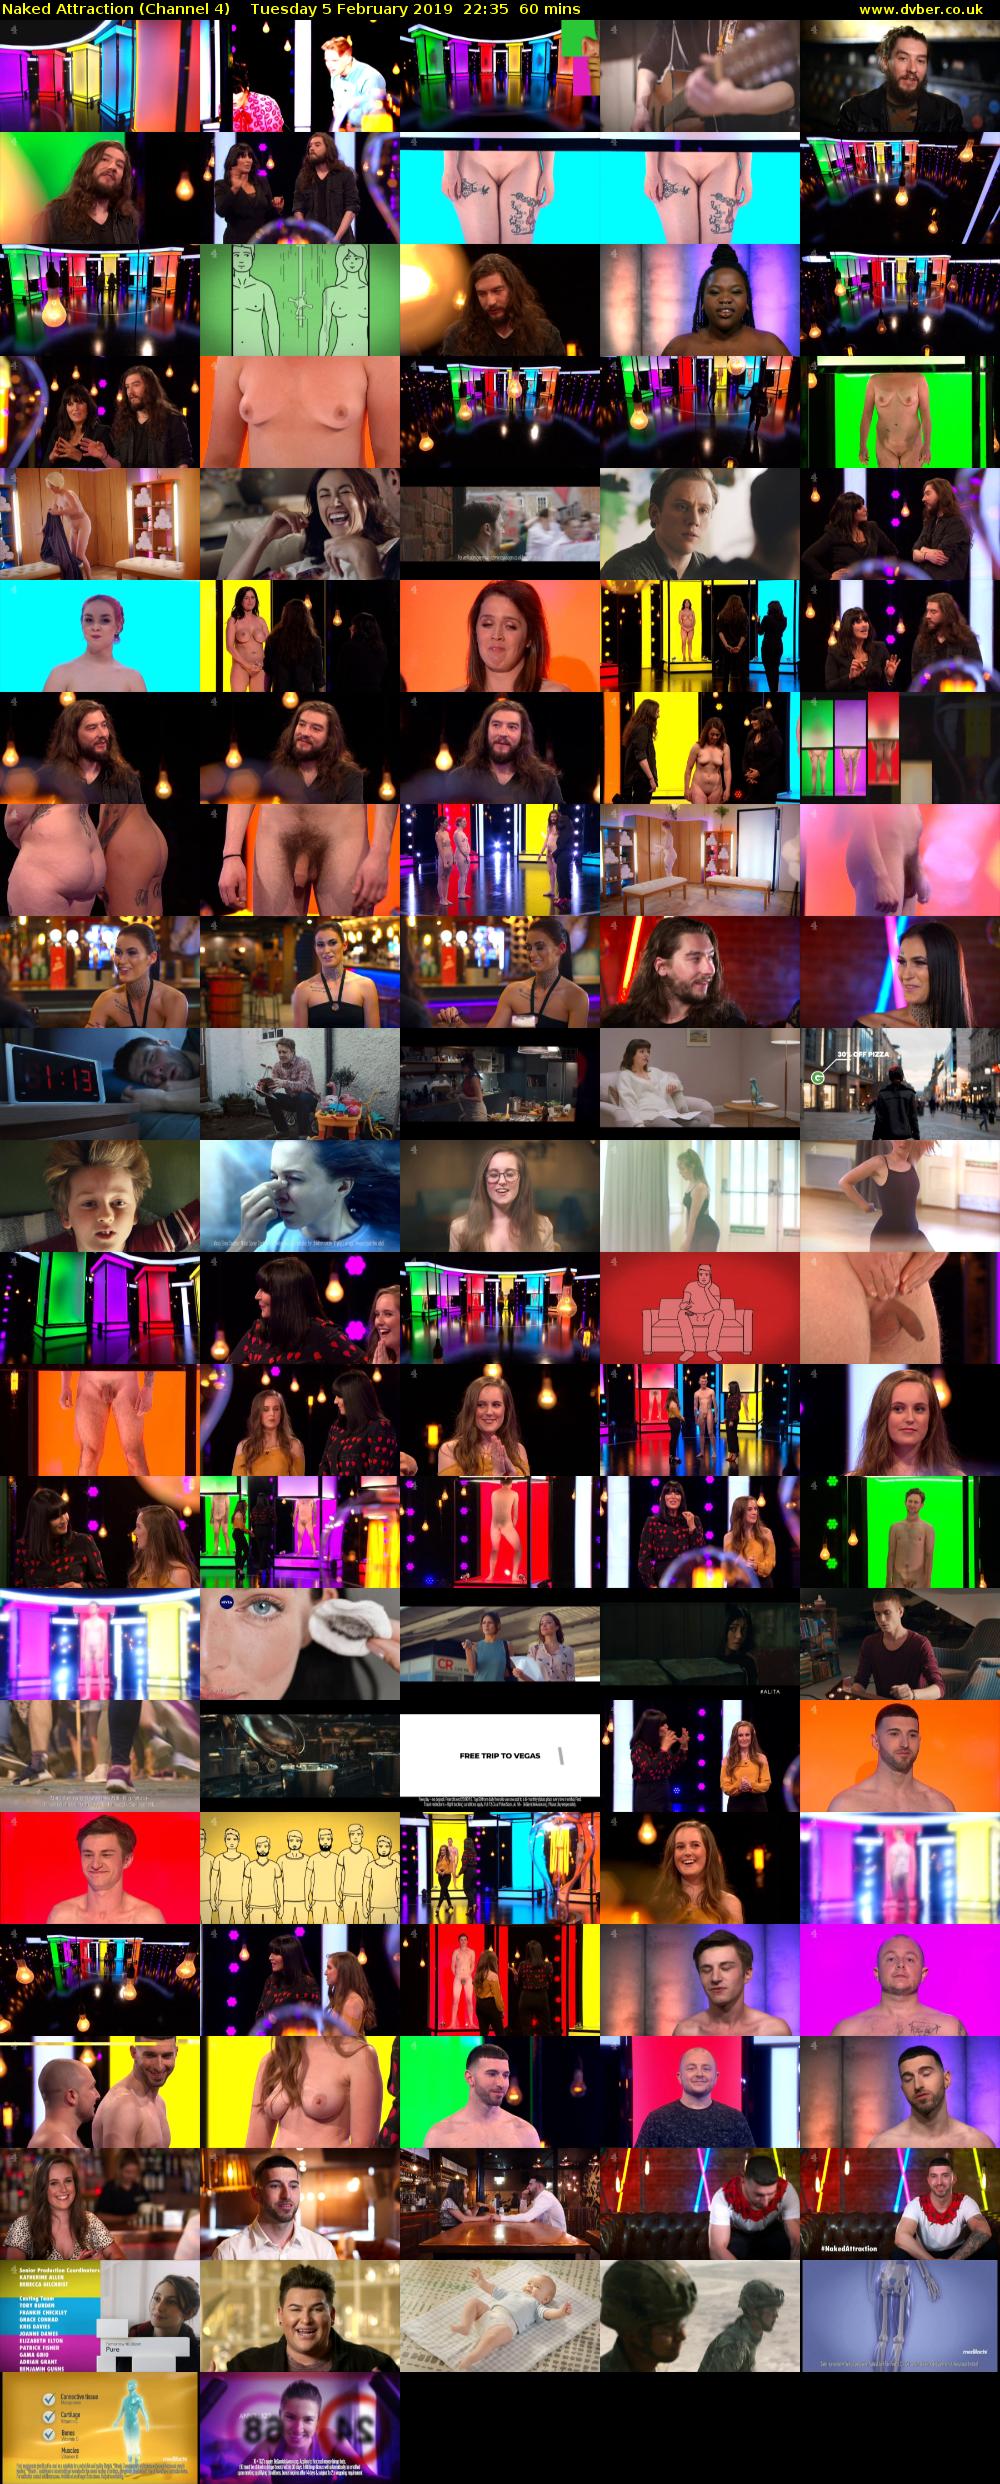 Naked Attraction (Channel 4) Tuesday 5 February 2019 22:35 - 23:35